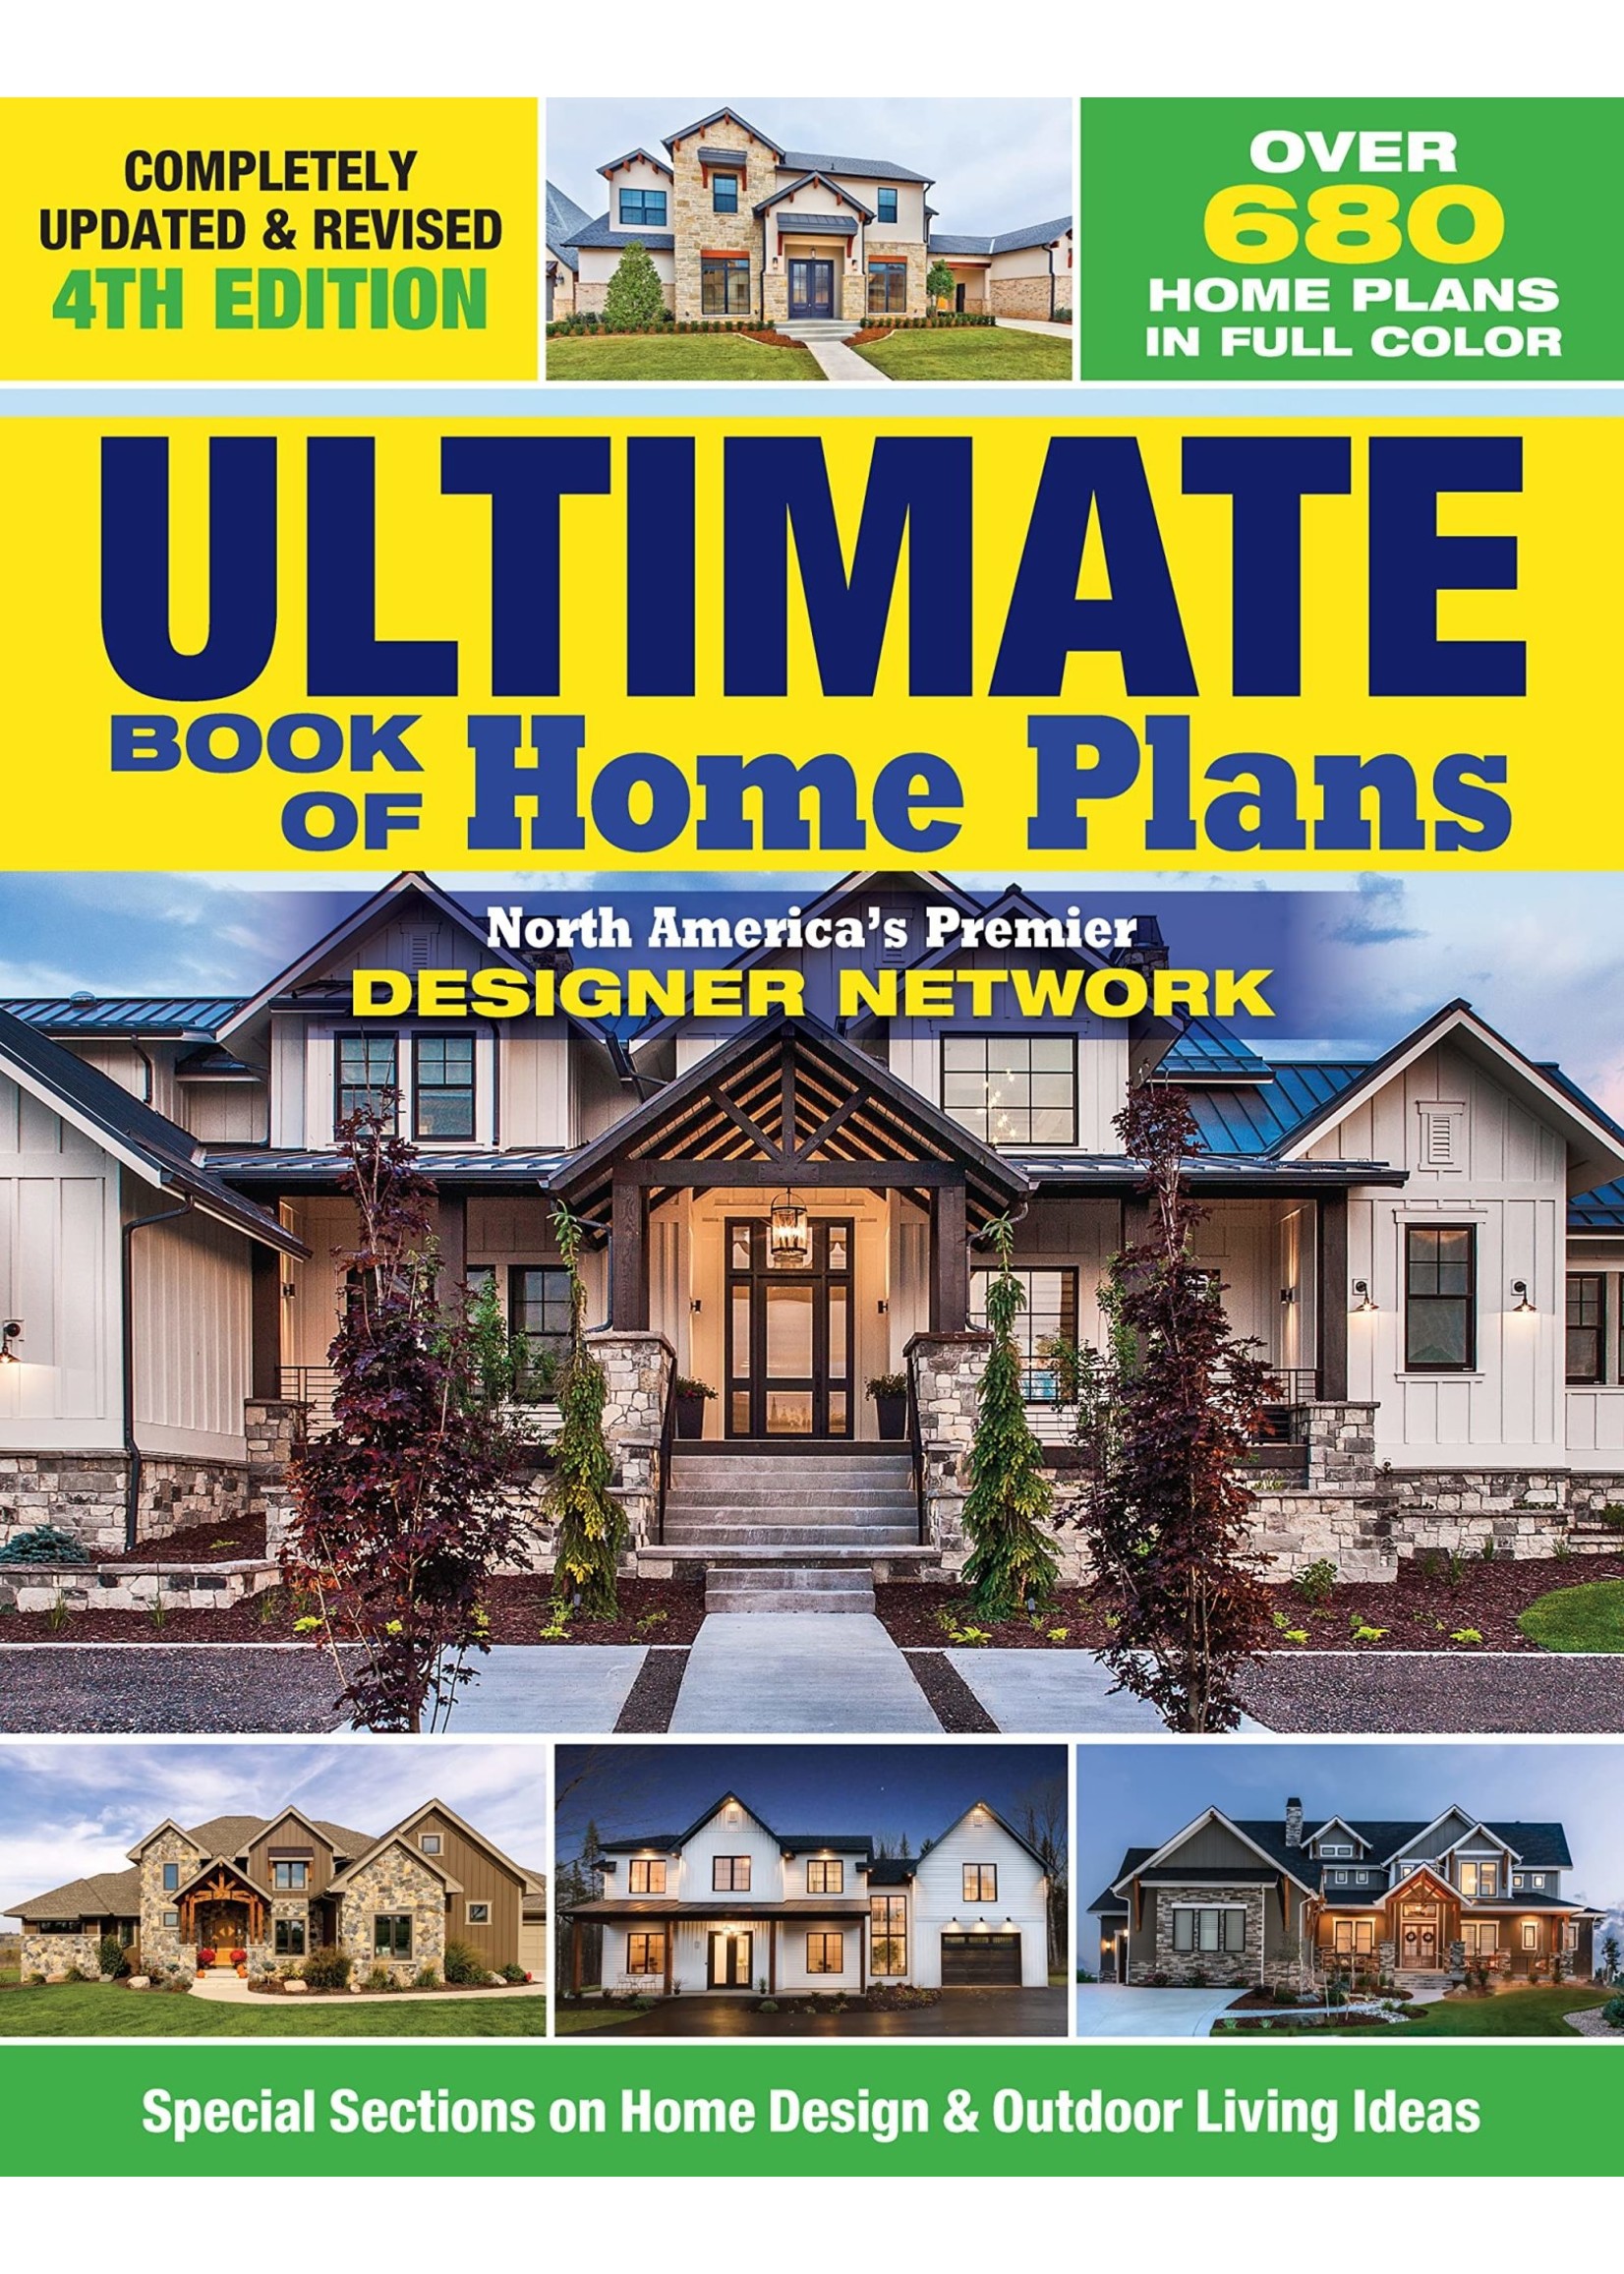 Ultimate Book of Home Plans, Completely Updated & Revised 4th Edition: Over 680 Home Plans in Full Color: North America's Premier Designer Network: Sections on Home Design & Outdoor Living Ideas by Editors of Creative Homeowner